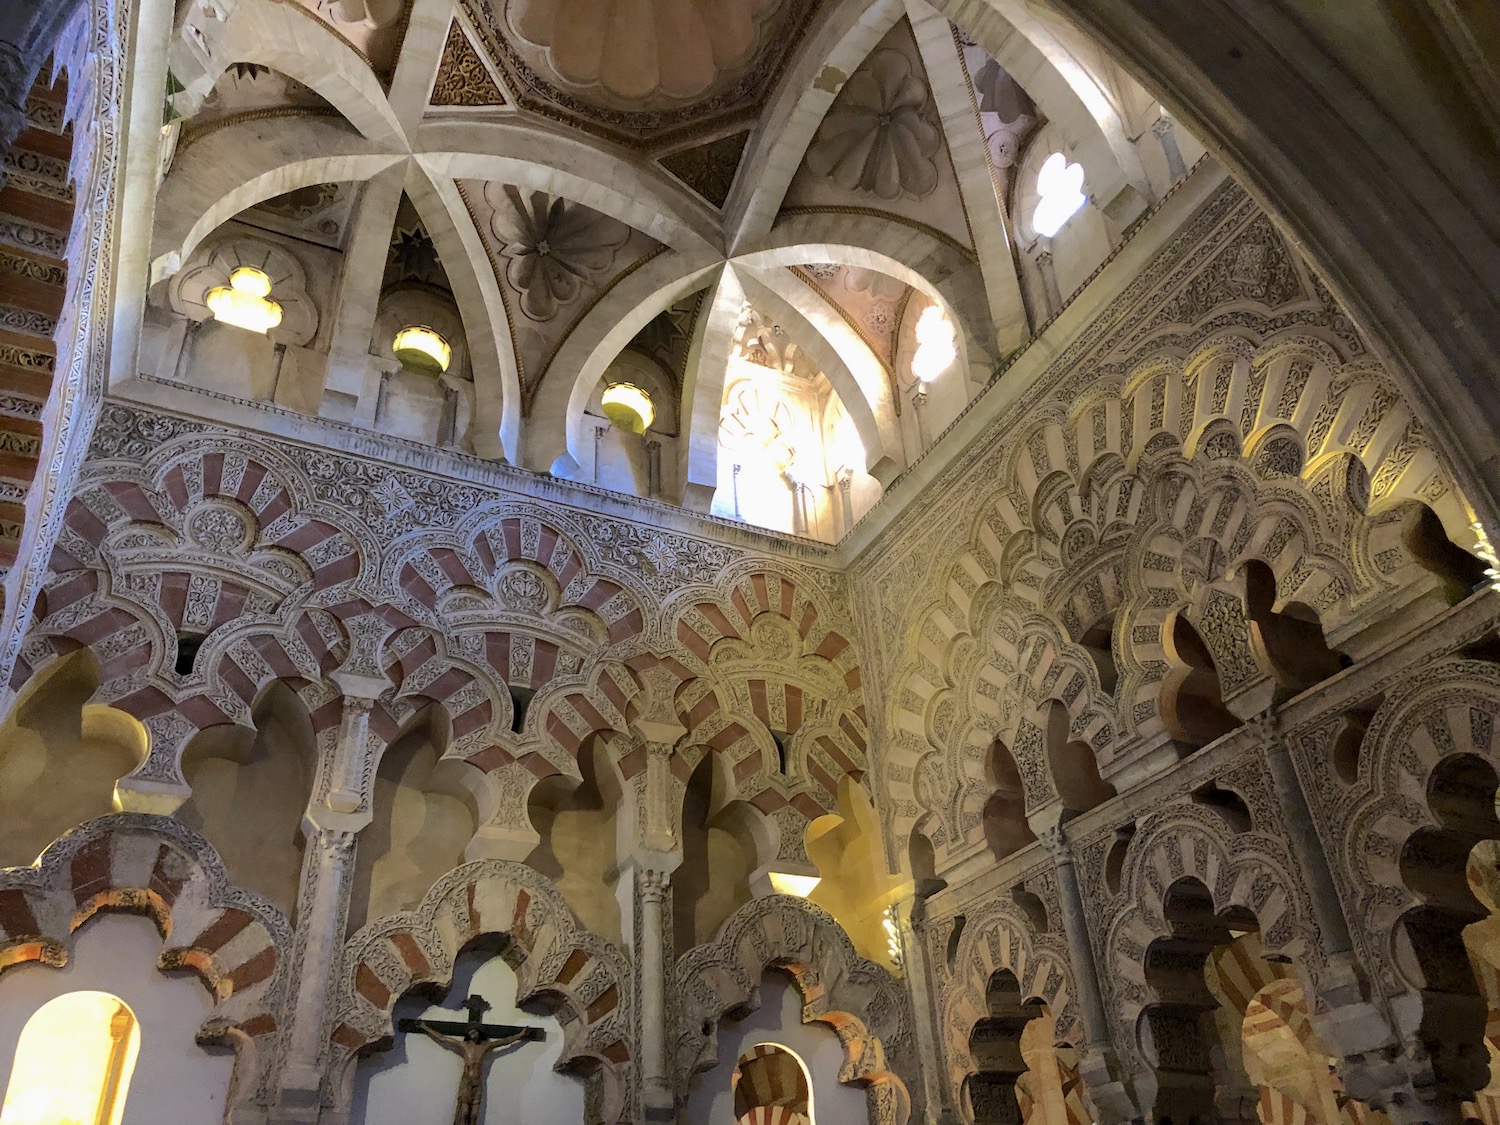 A mix of Islamic and Christian styles in the Mezquita